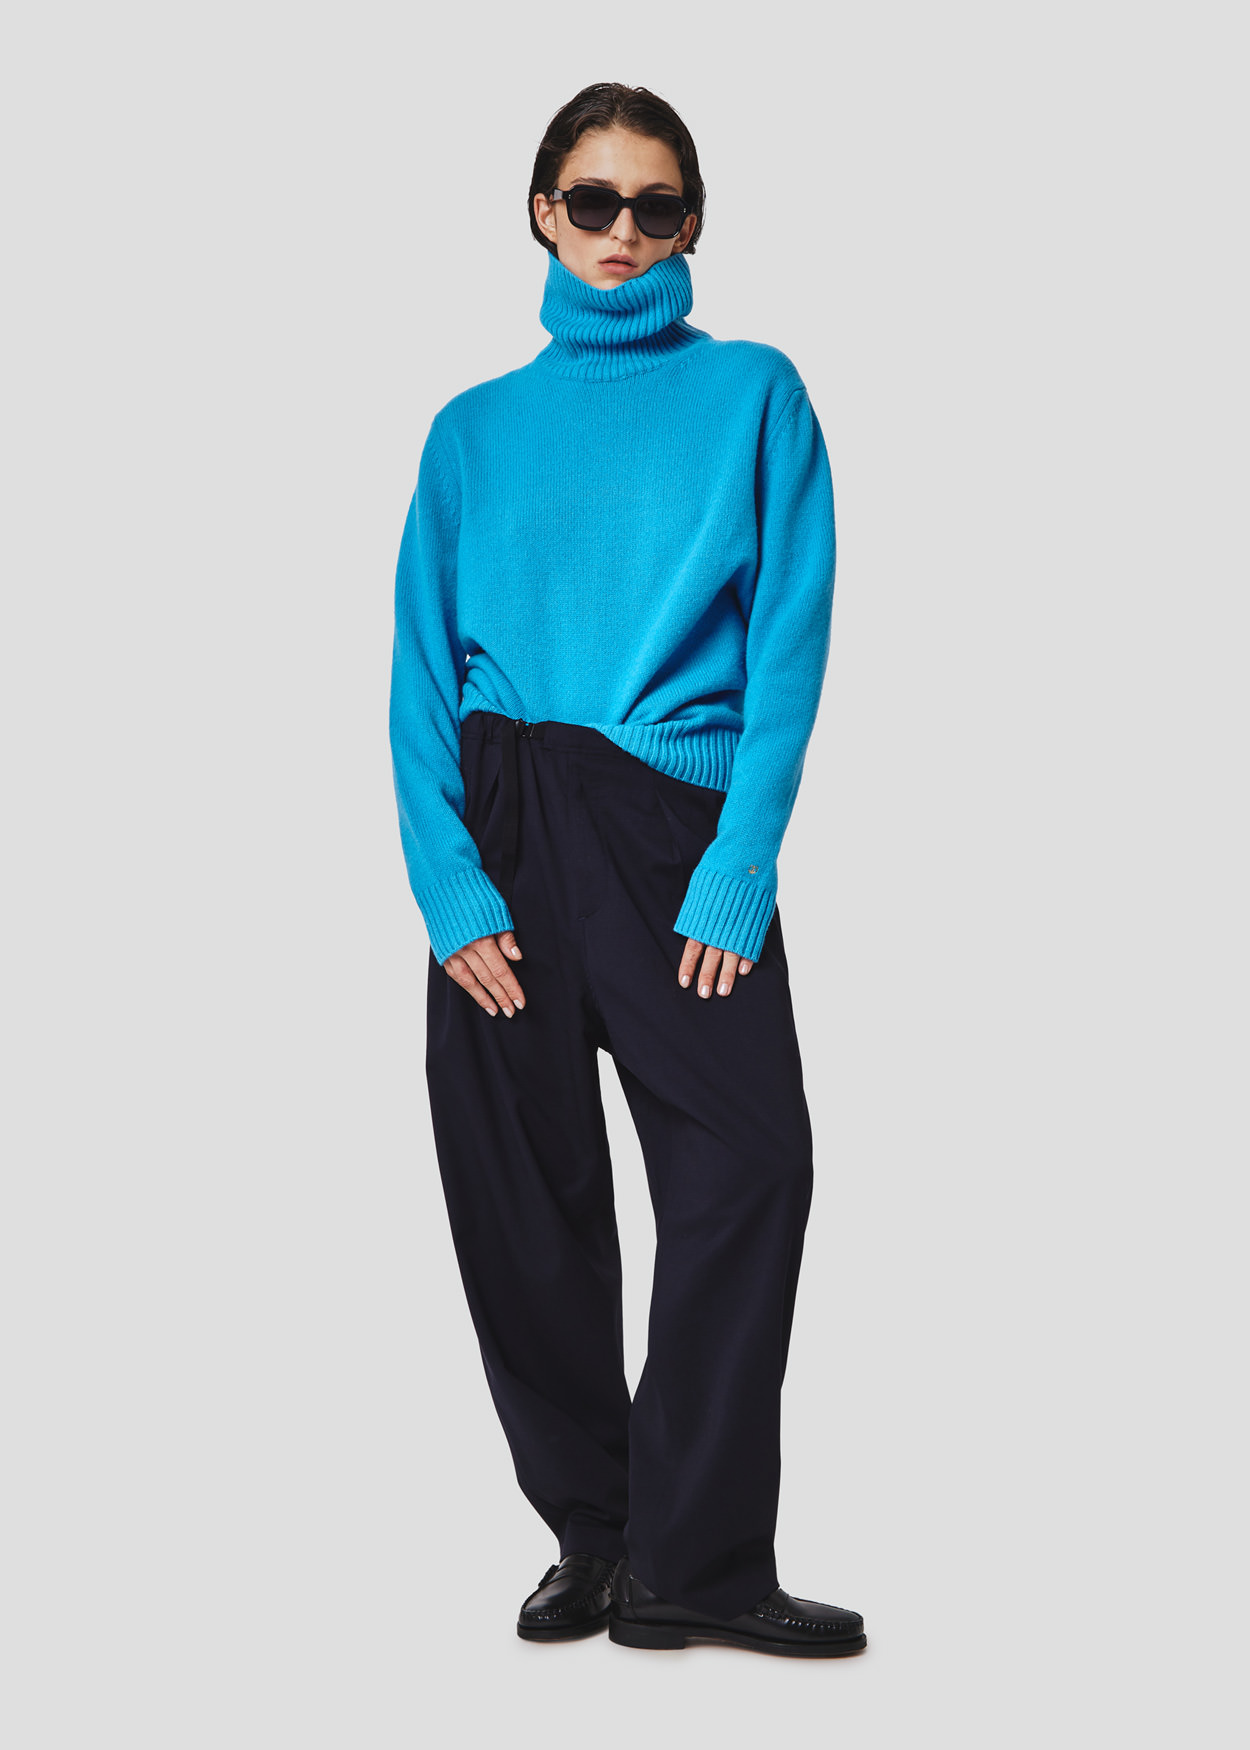 SEVEN GAUGE: TURTLE NECK SWEATER TURQUOISE